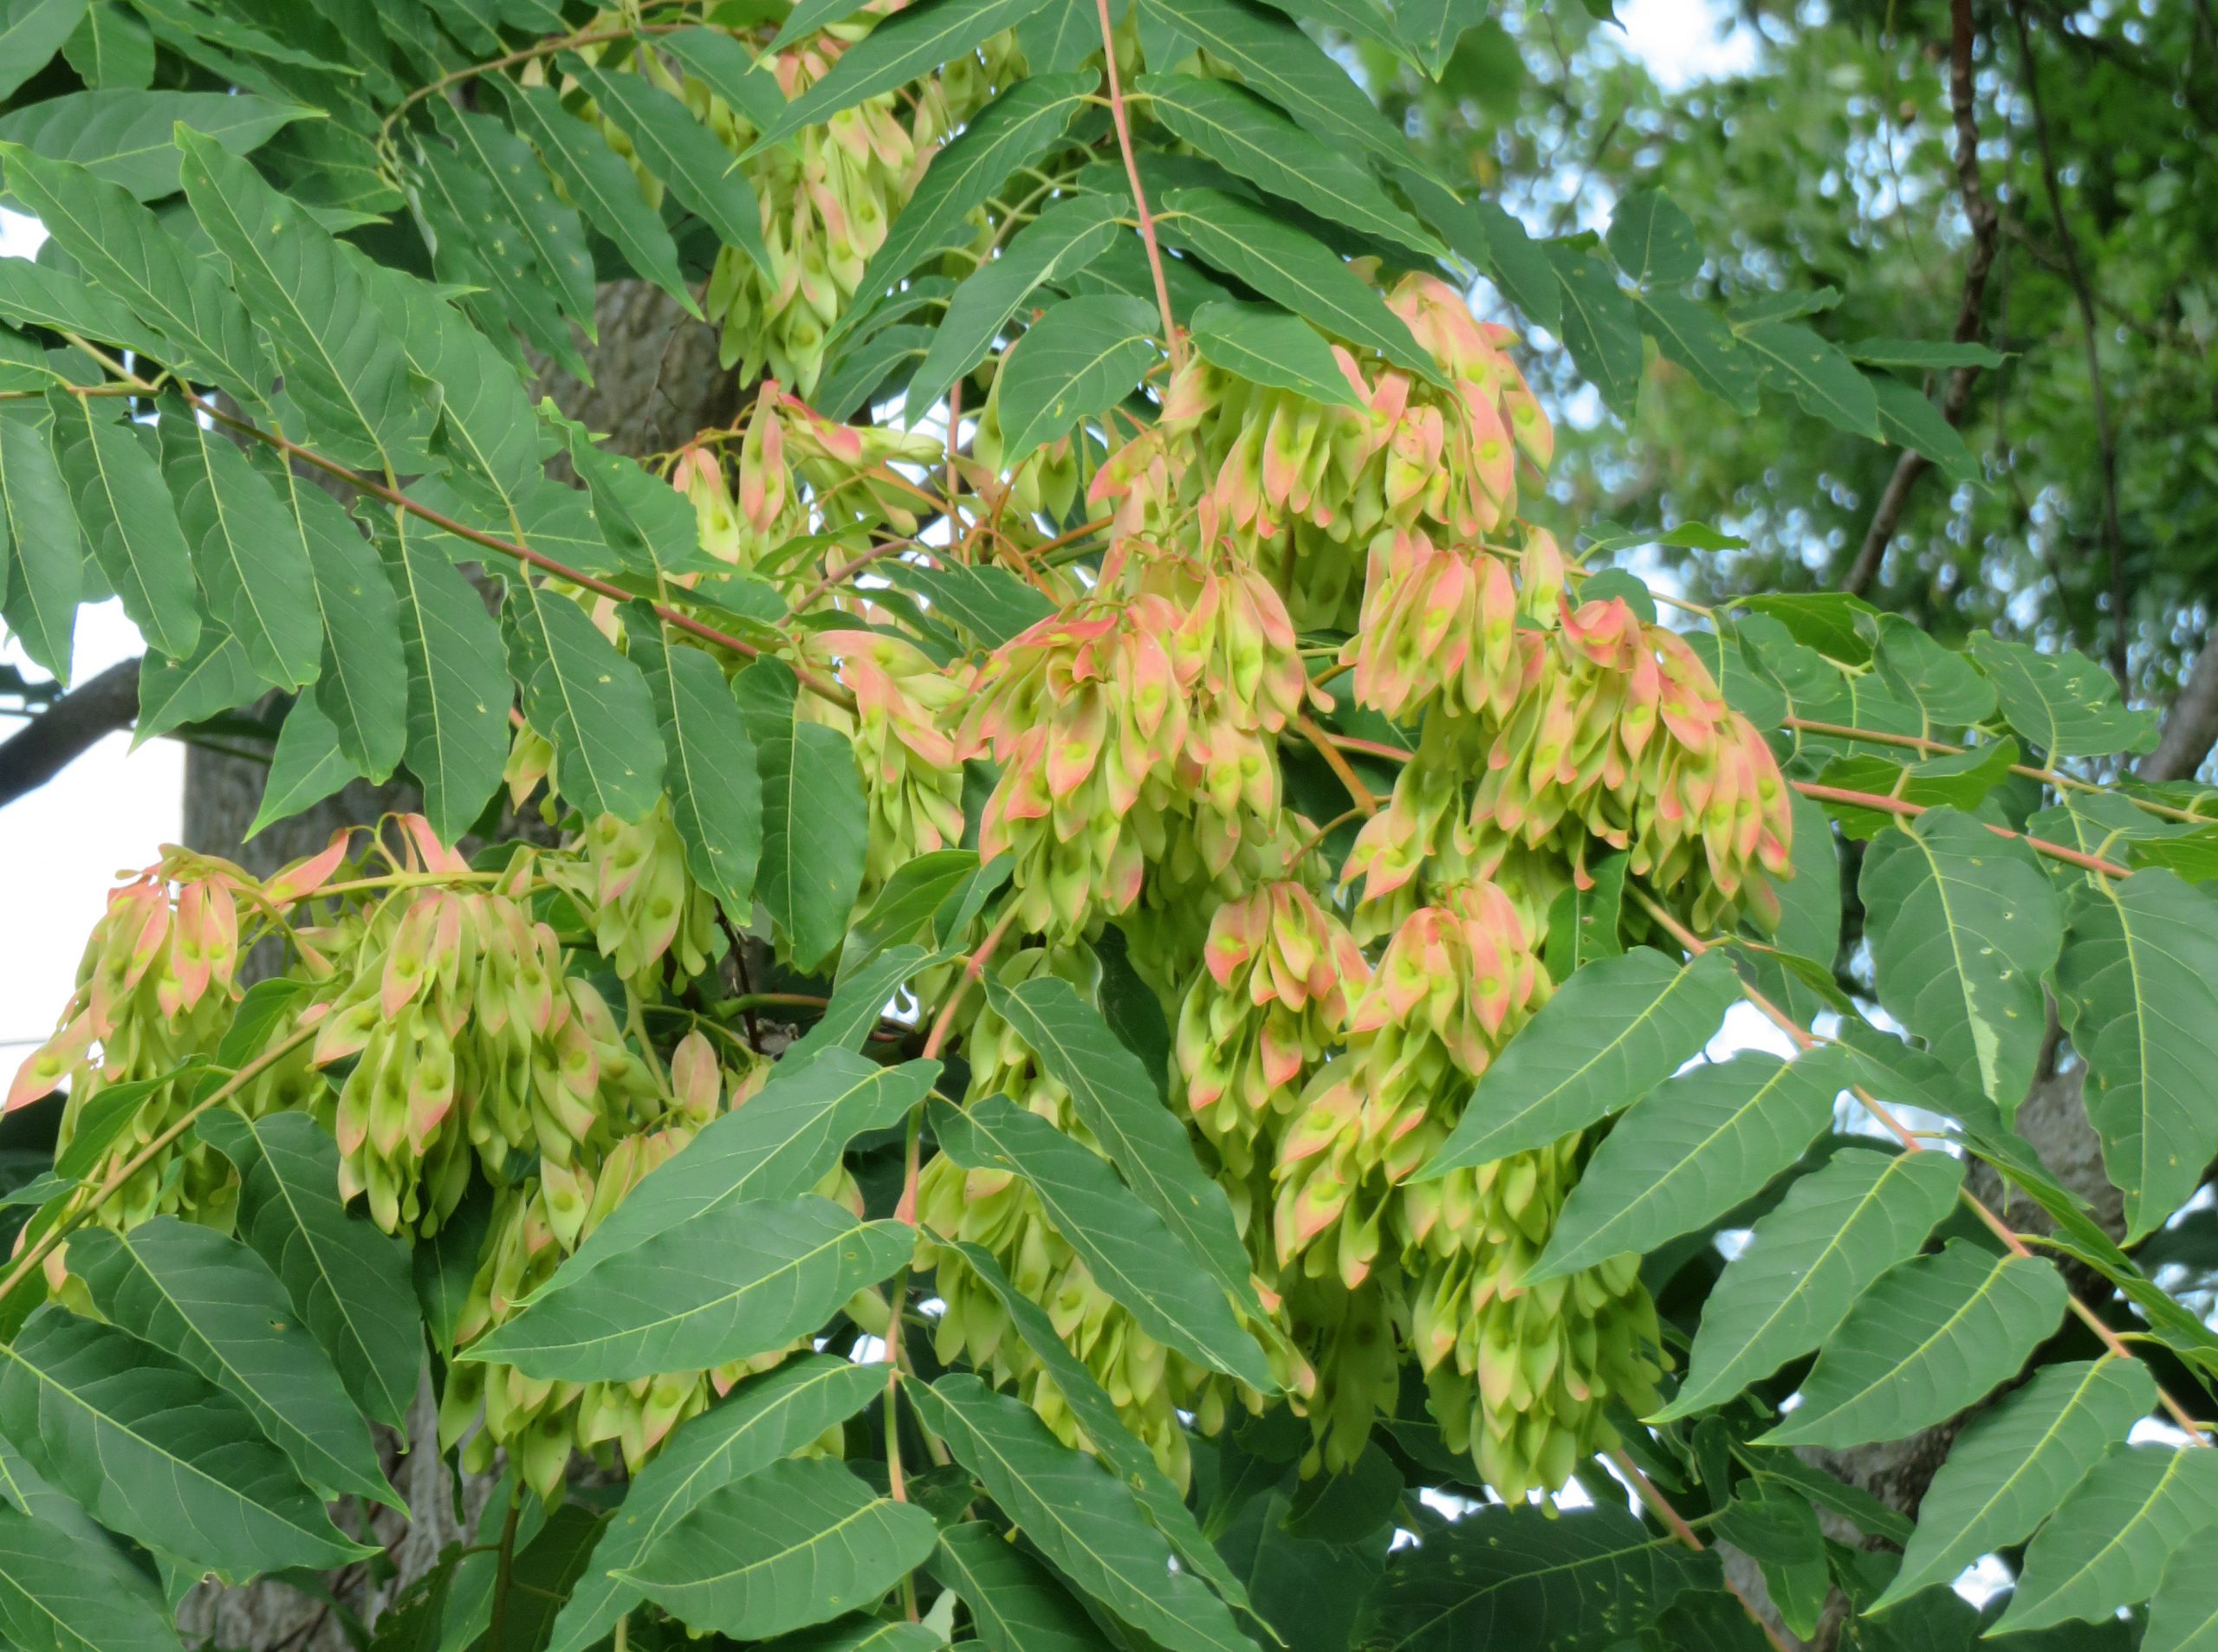 Tree-of-heaven foliage and distinct seed clusters on female trees.